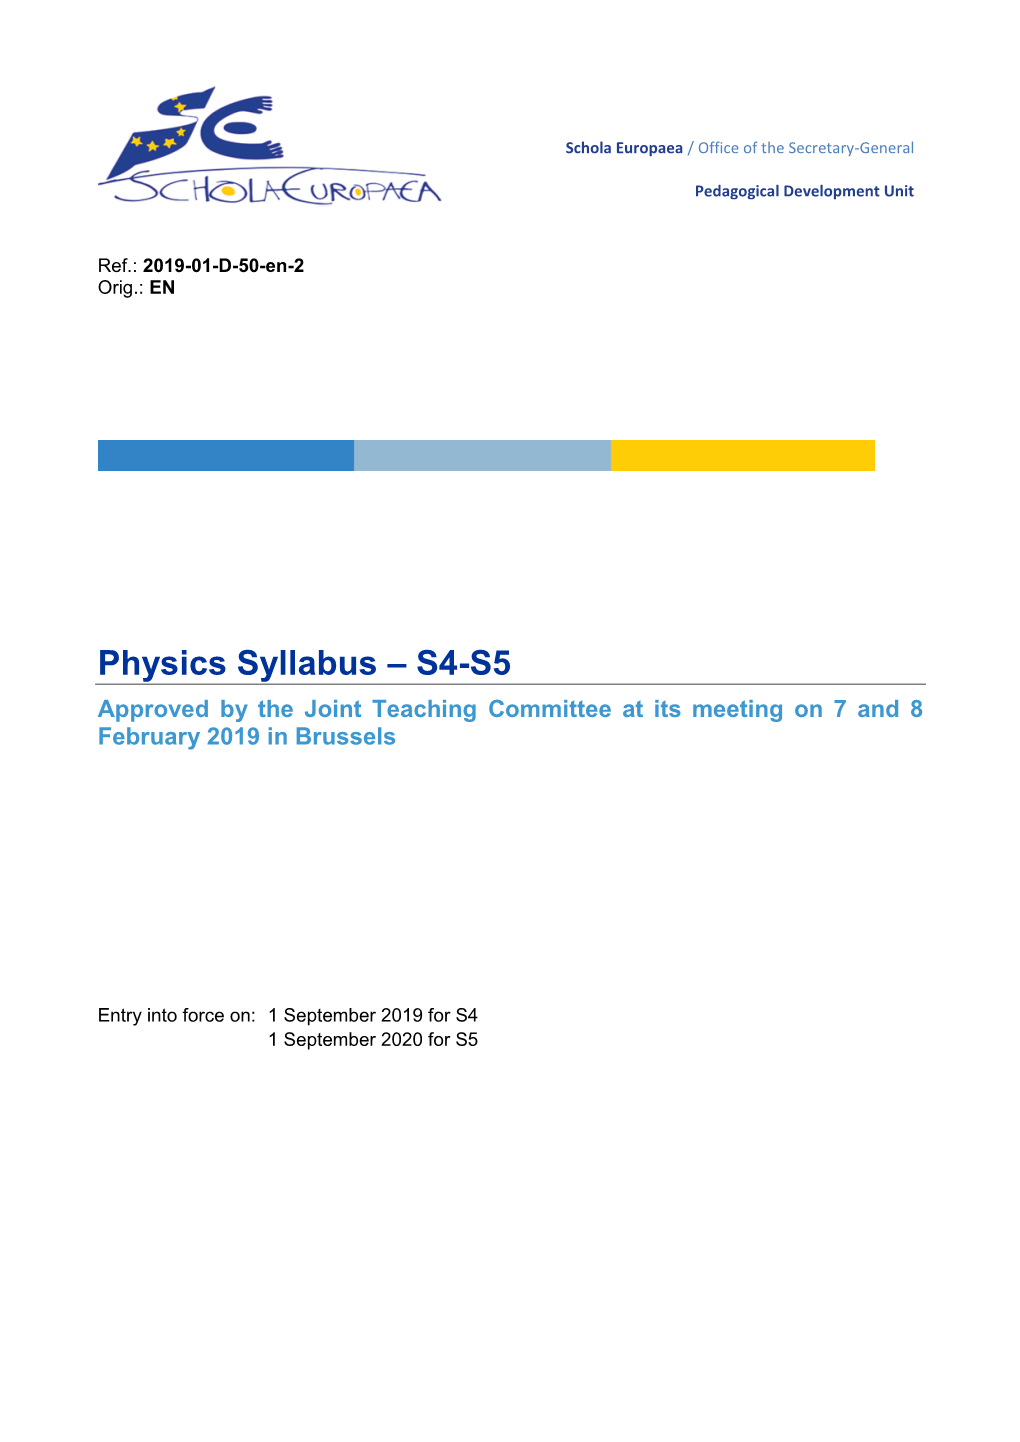 Physics Syllabus – S4-S5 Approved by the Joint Teaching Committee at Its Meeting on 7 and 8 February 2019 in Brussels